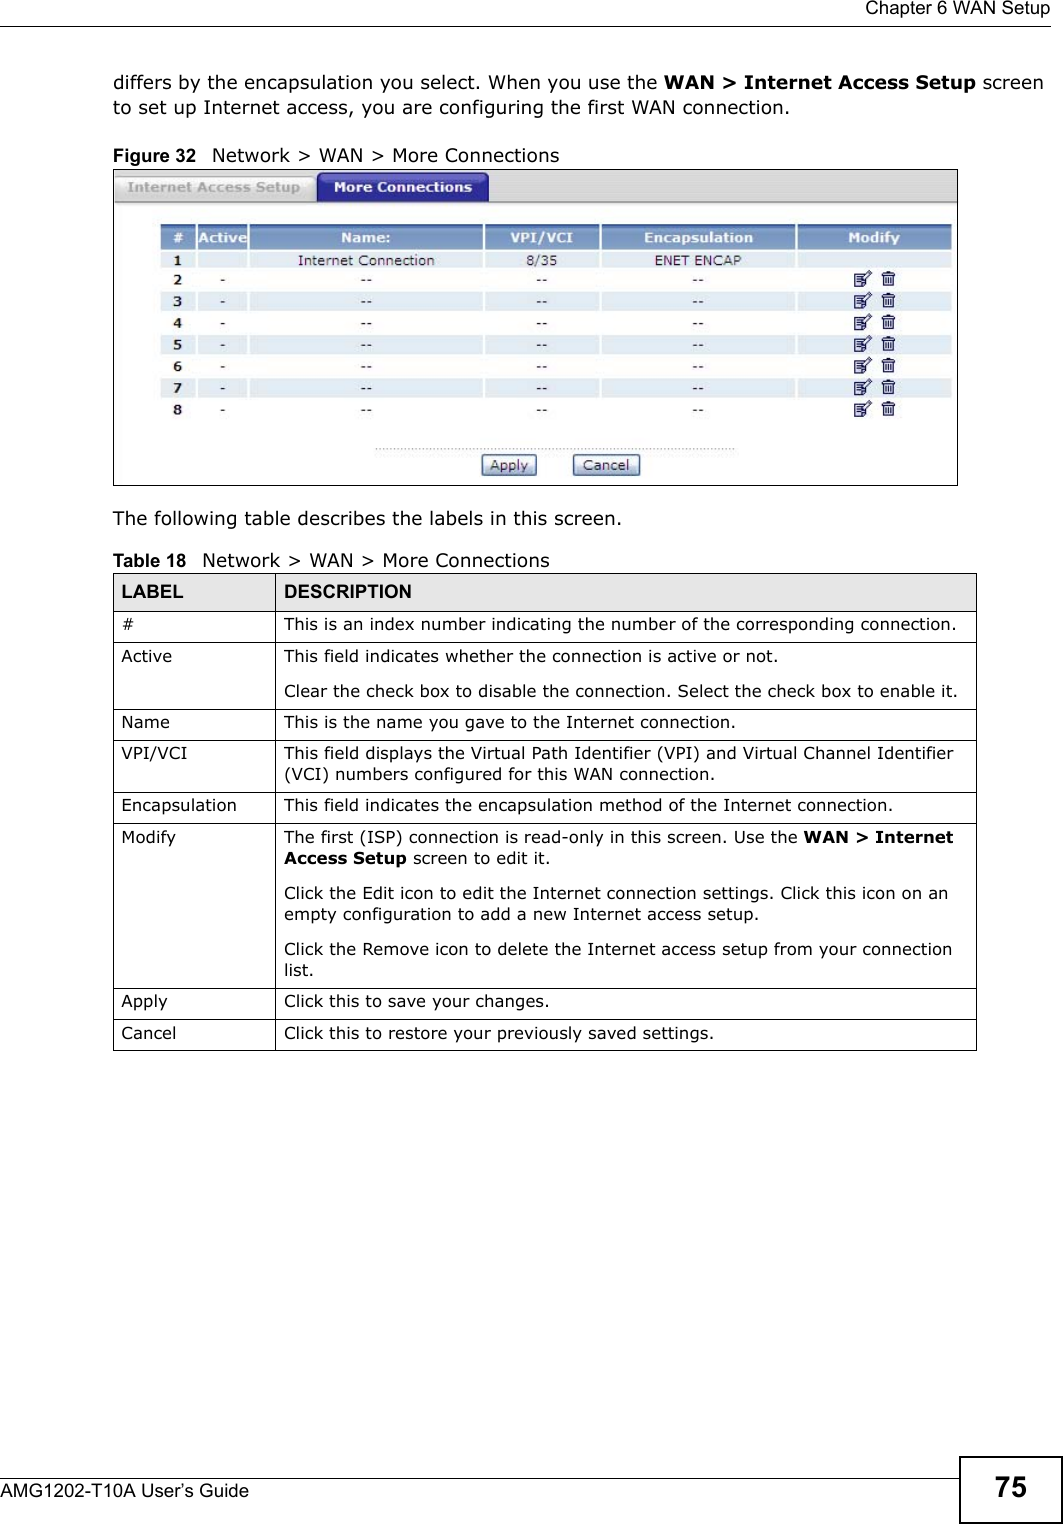  Chapter 6 WAN SetupAMG1202-T10A User’s Guide 75differs by the encapsulation you select. When you use the WAN &gt; Internet Access Setup screen to set up Internet access, you are configuring the first WAN connection.Figure 32   Network &gt; WAN &gt; More ConnectionsThe following table describes the labels in this screen.  Table 18   Network &gt; WAN &gt; More ConnectionsLABEL DESCRIPTION# This is an index number indicating the number of the corresponding connection.Active This field indicates whether the connection is active or not.Clear the check box to disable the connection. Select the check box to enable it.Name This is the name you gave to the Internet connection.VPI/VCI This field displays the Virtual Path Identifier (VPI) and Virtual Channel Identifier (VCI) numbers configured for this WAN connection. Encapsulation This field indicates the encapsulation method of the Internet connection.Modify The first (ISP) connection is read-only in this screen. Use the WAN &gt; Internet Access Setup screen to edit it.Click the Edit icon to edit the Internet connection settings. Click this icon on an empty configuration to add a new Internet access setup.Click the Remove icon to delete the Internet access setup from your connection list.Apply Click this to save your changes. Cancel Click this to restore your previously saved settings.